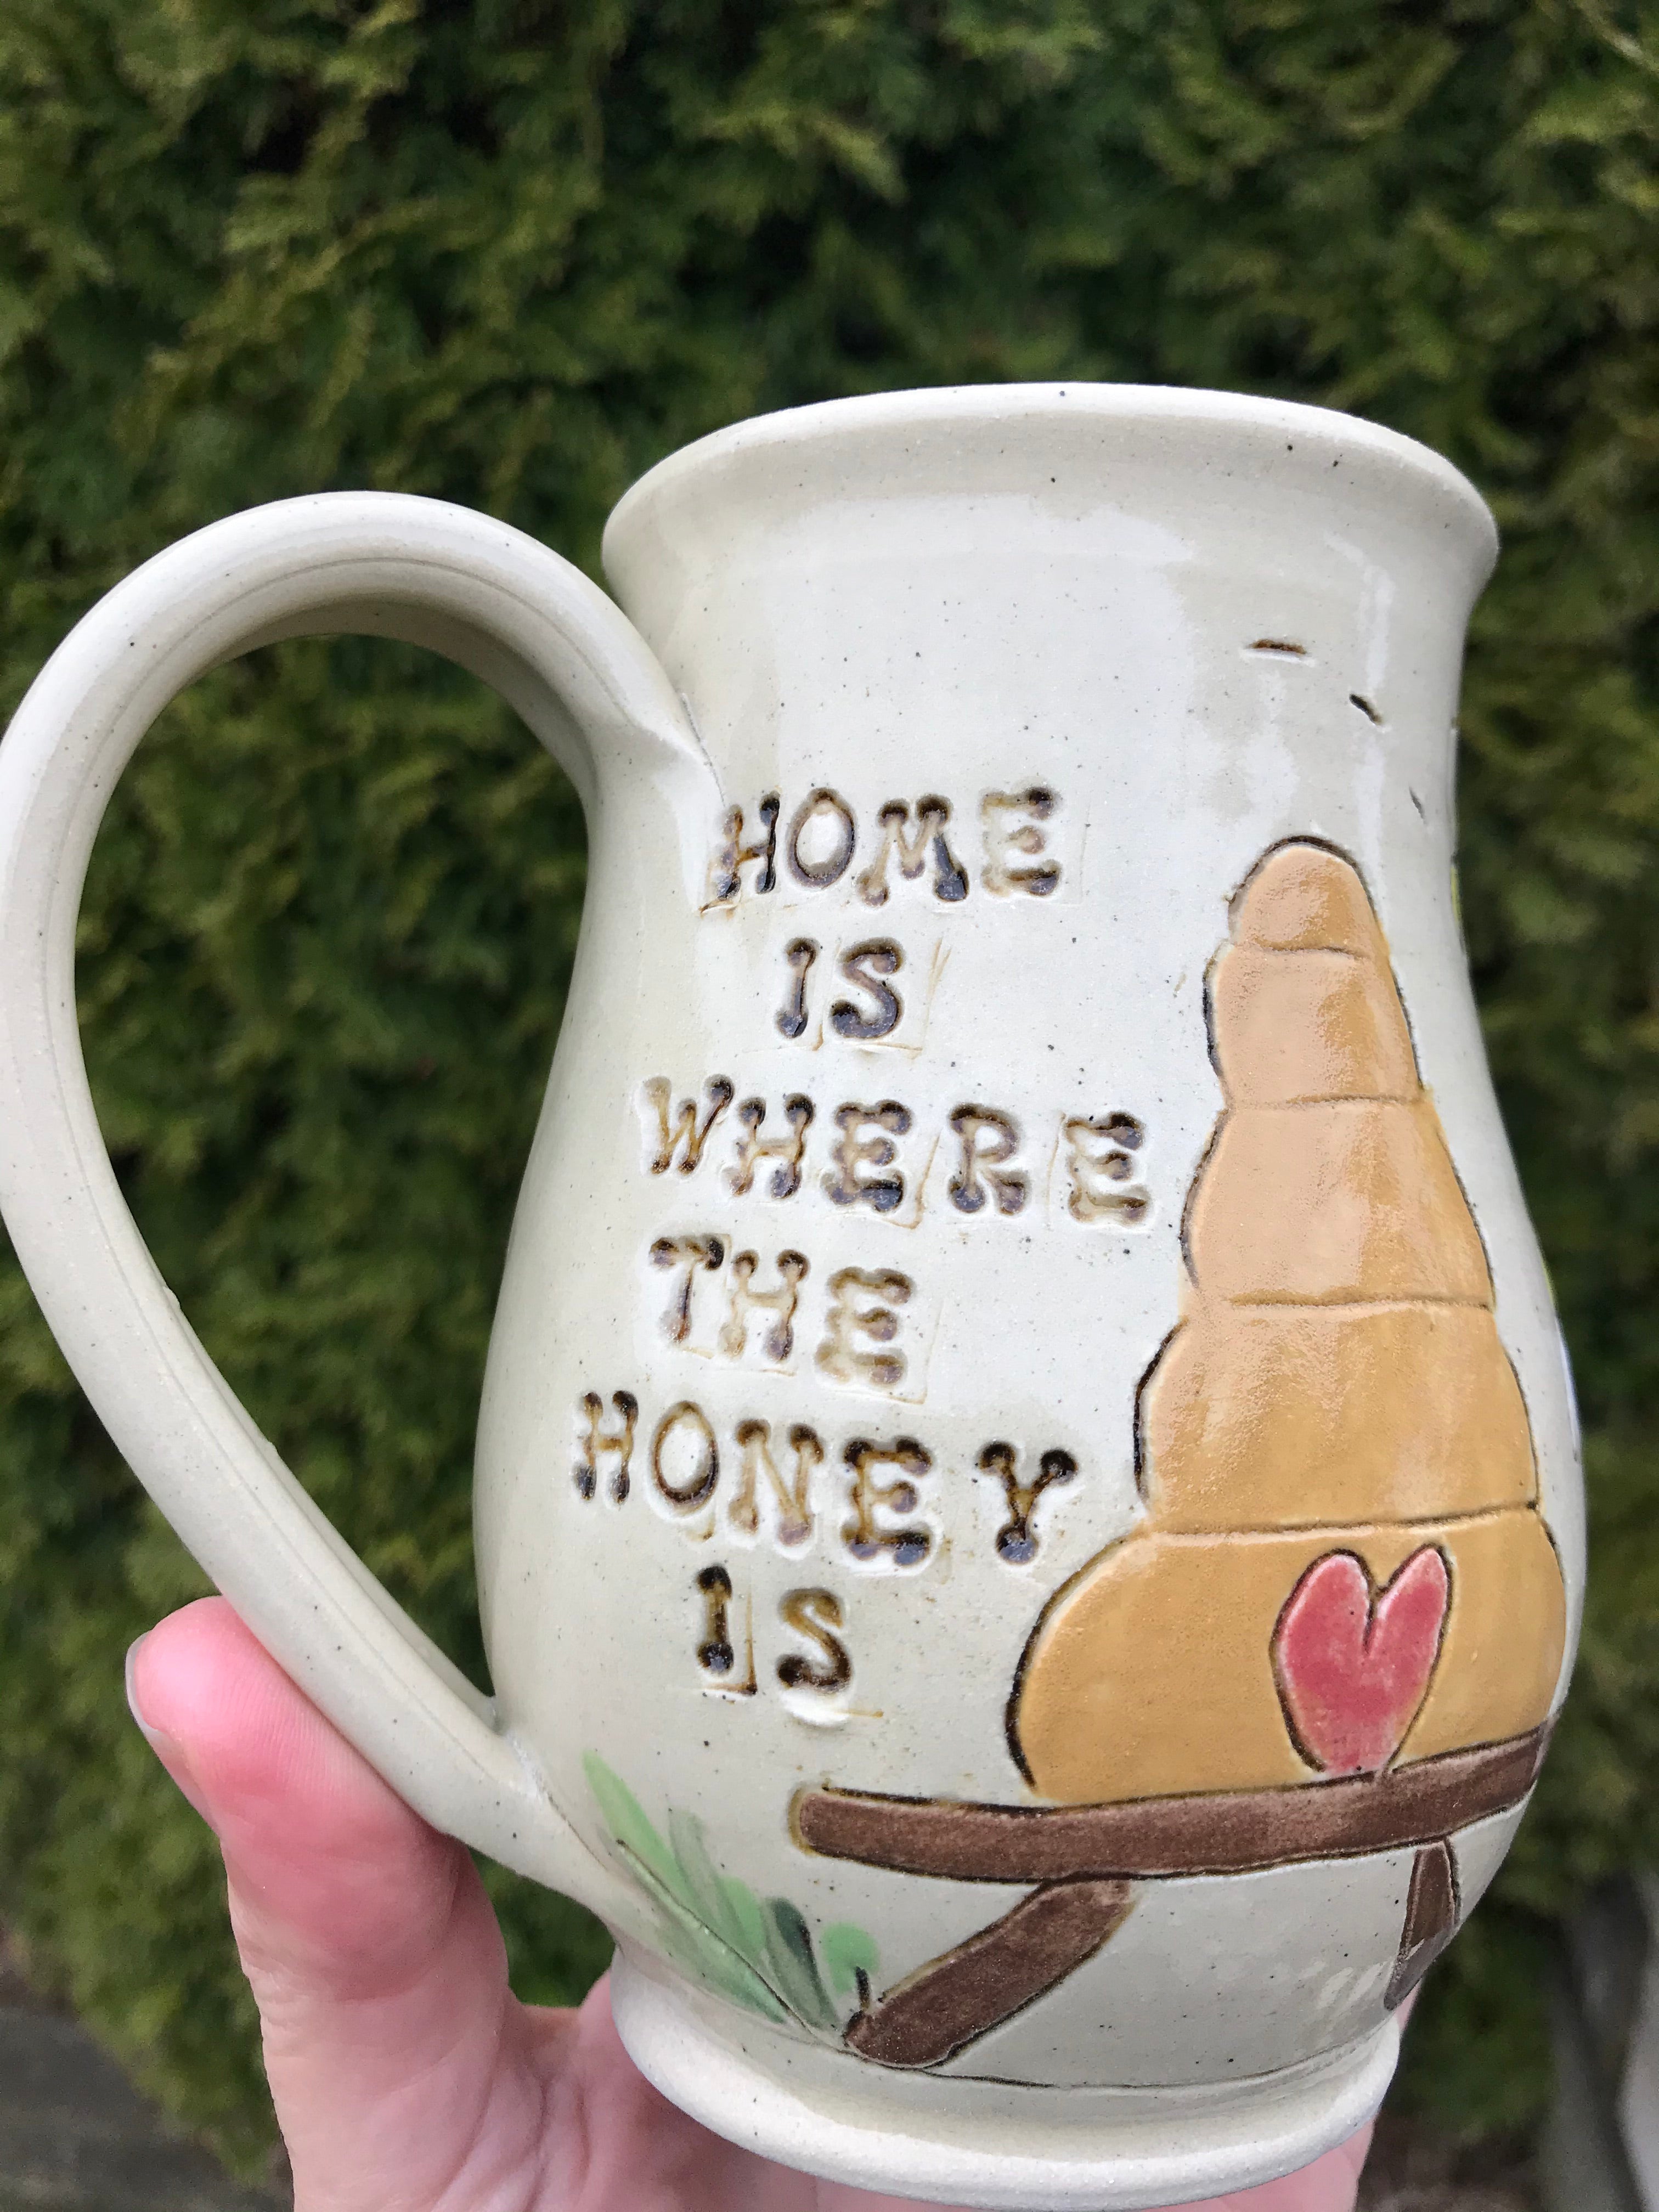 Home is where the honey is